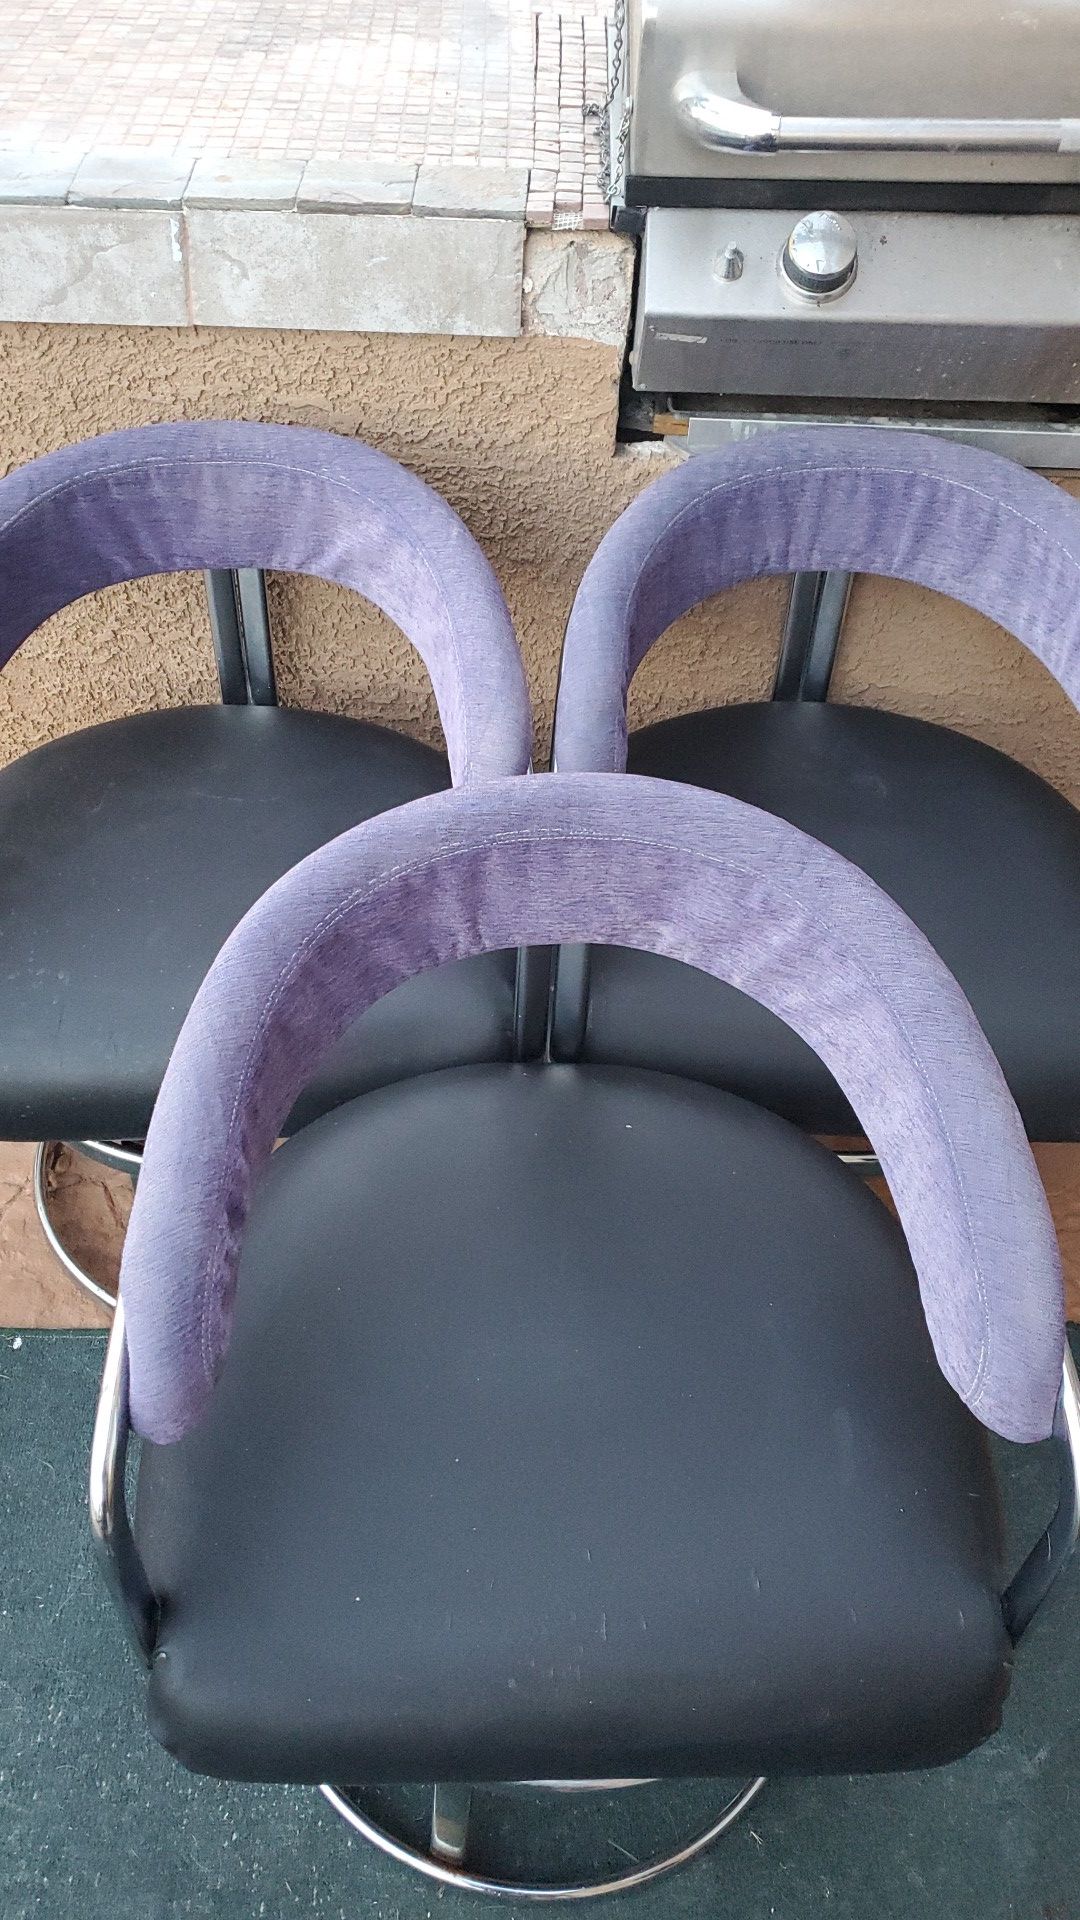 Chairs 3 each asking 120$ for all 3